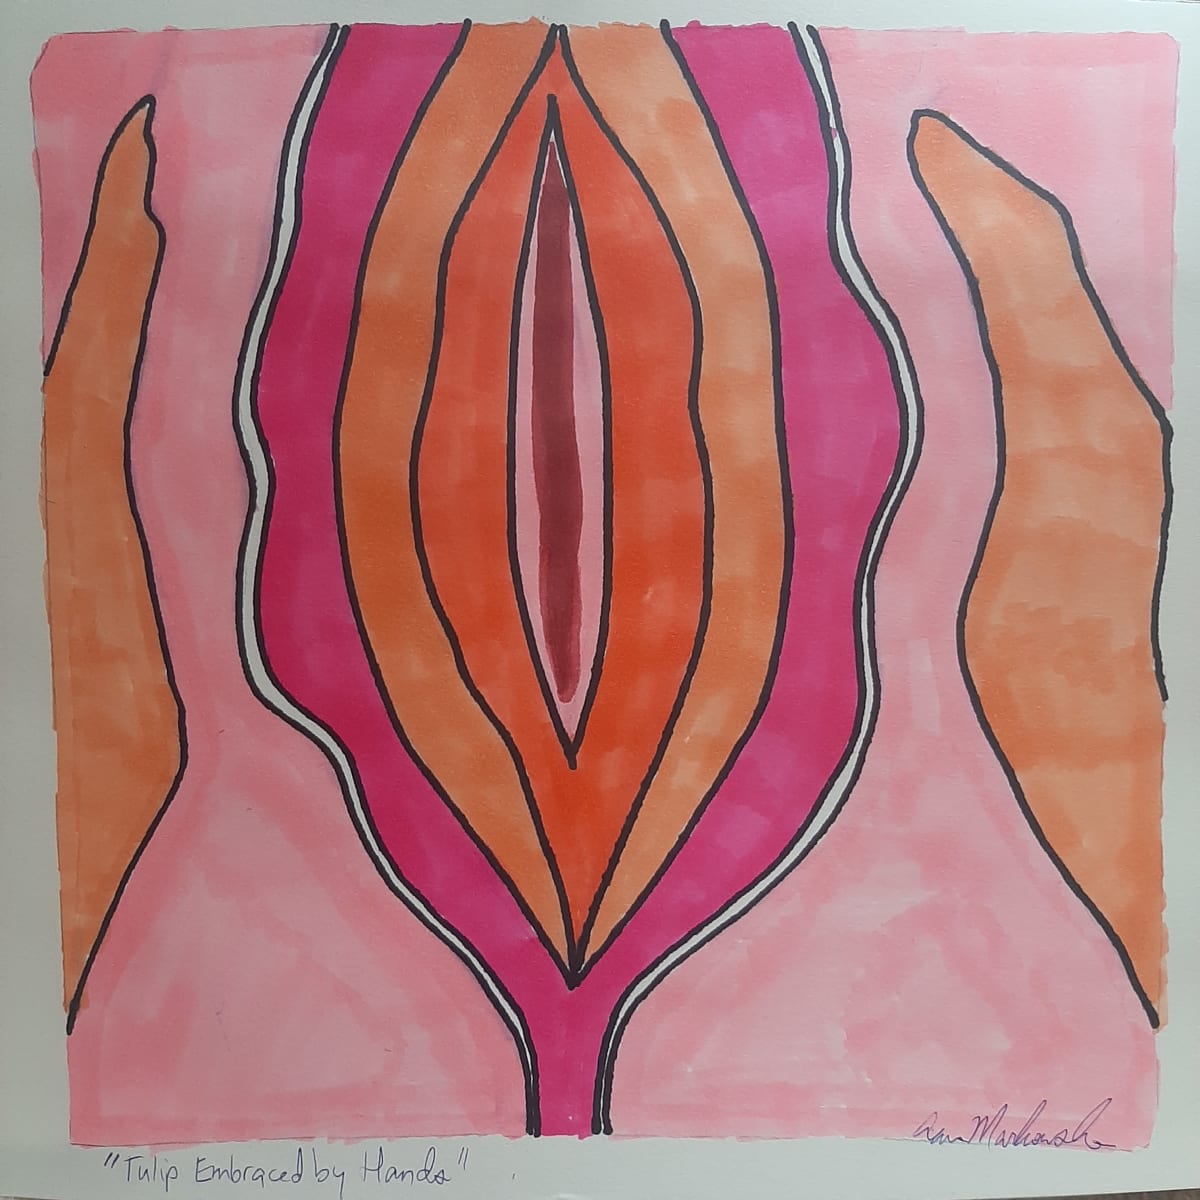 Tulip Embraced By Hands by Anna Markowska  Image: Drawn on water colour paper. Original measures 10 inches by 10 inches.